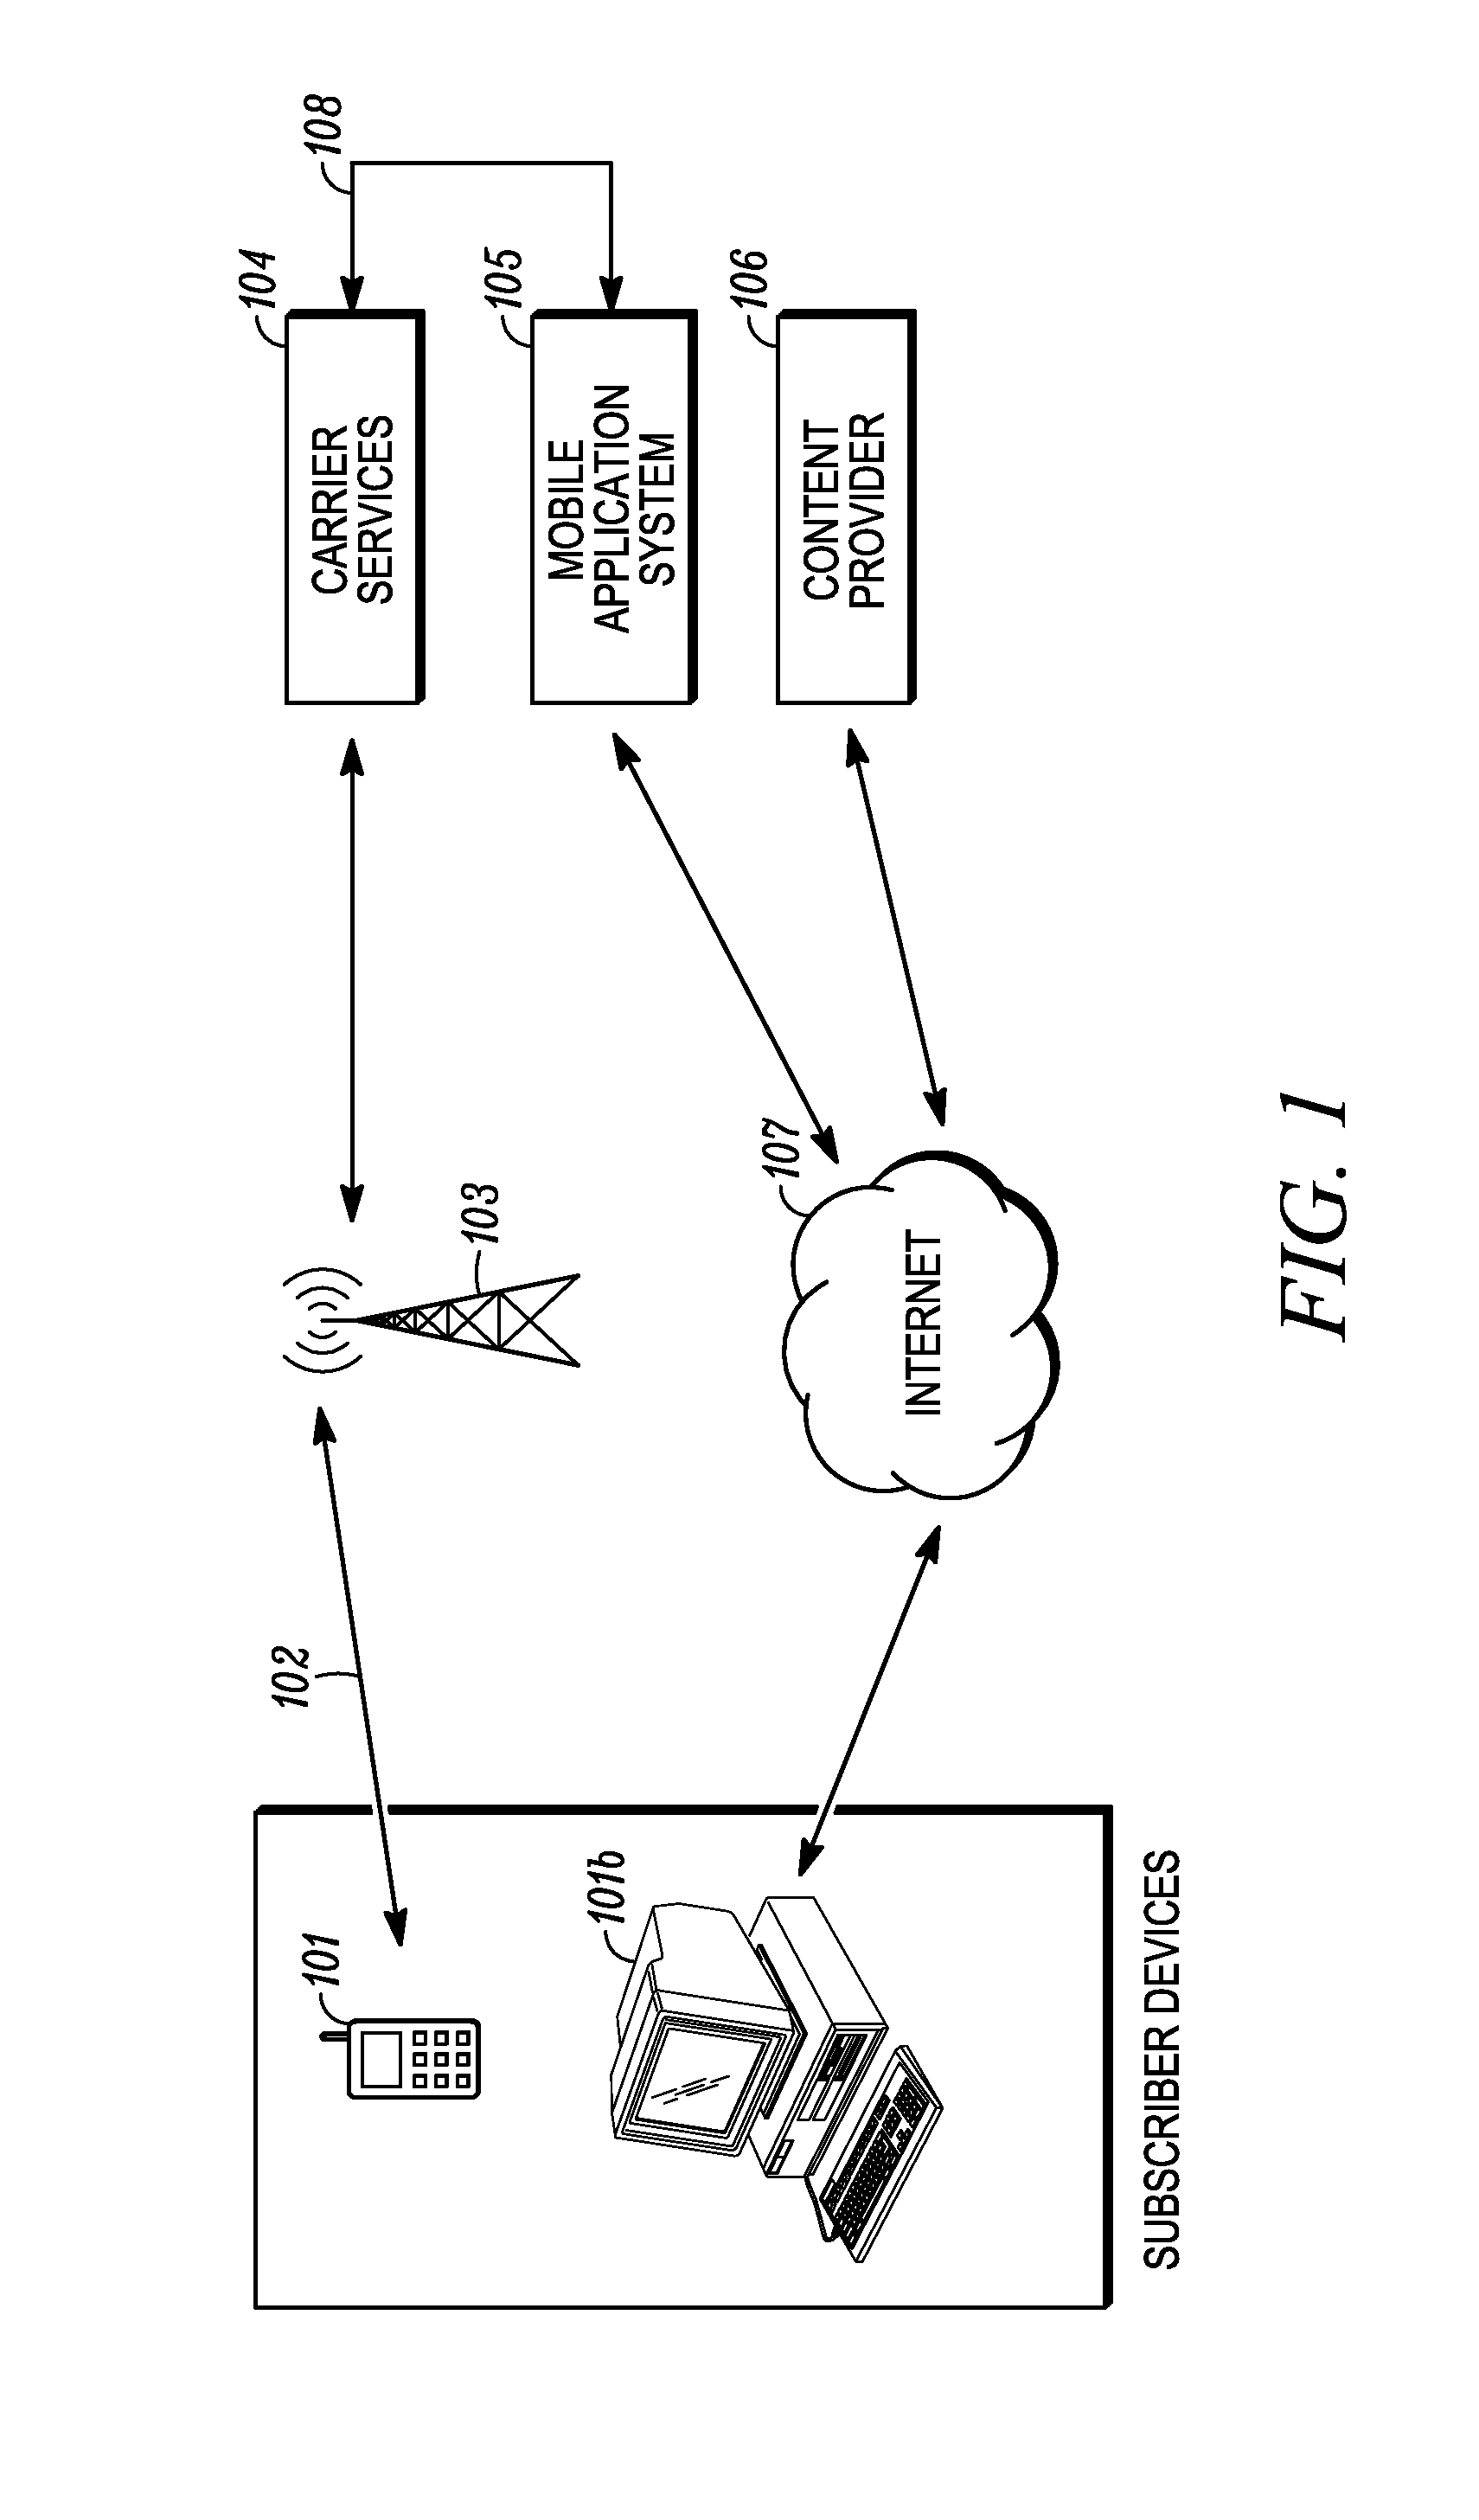 Method and System for Maintaining and Distributing Wireless Applications